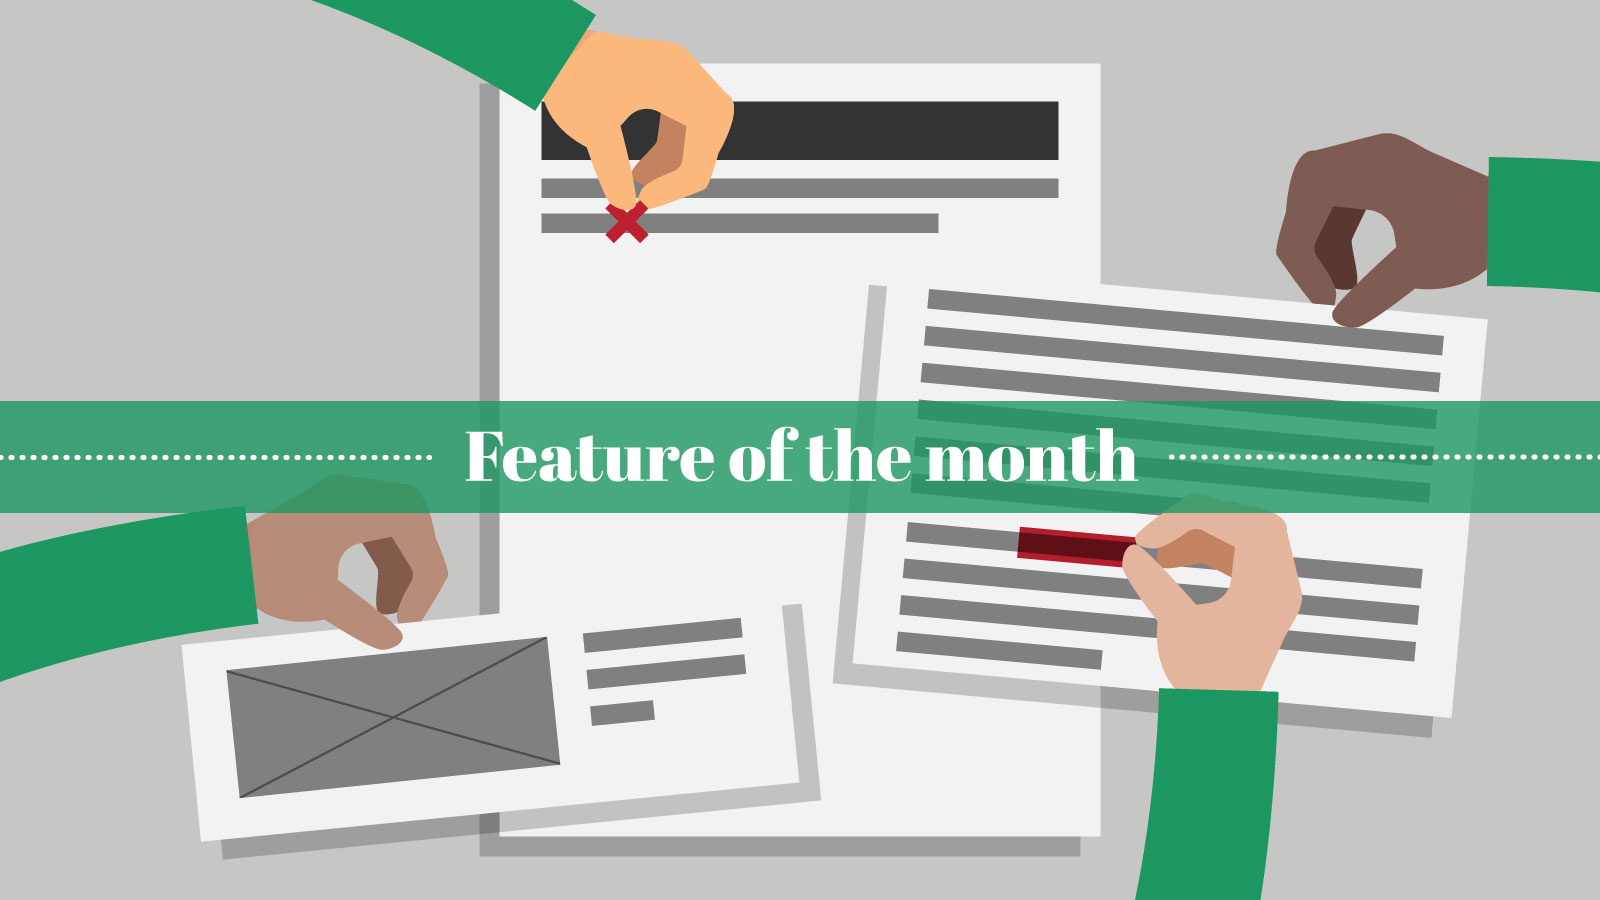 Feature of the month - Collaborative writing in CKEditor 5